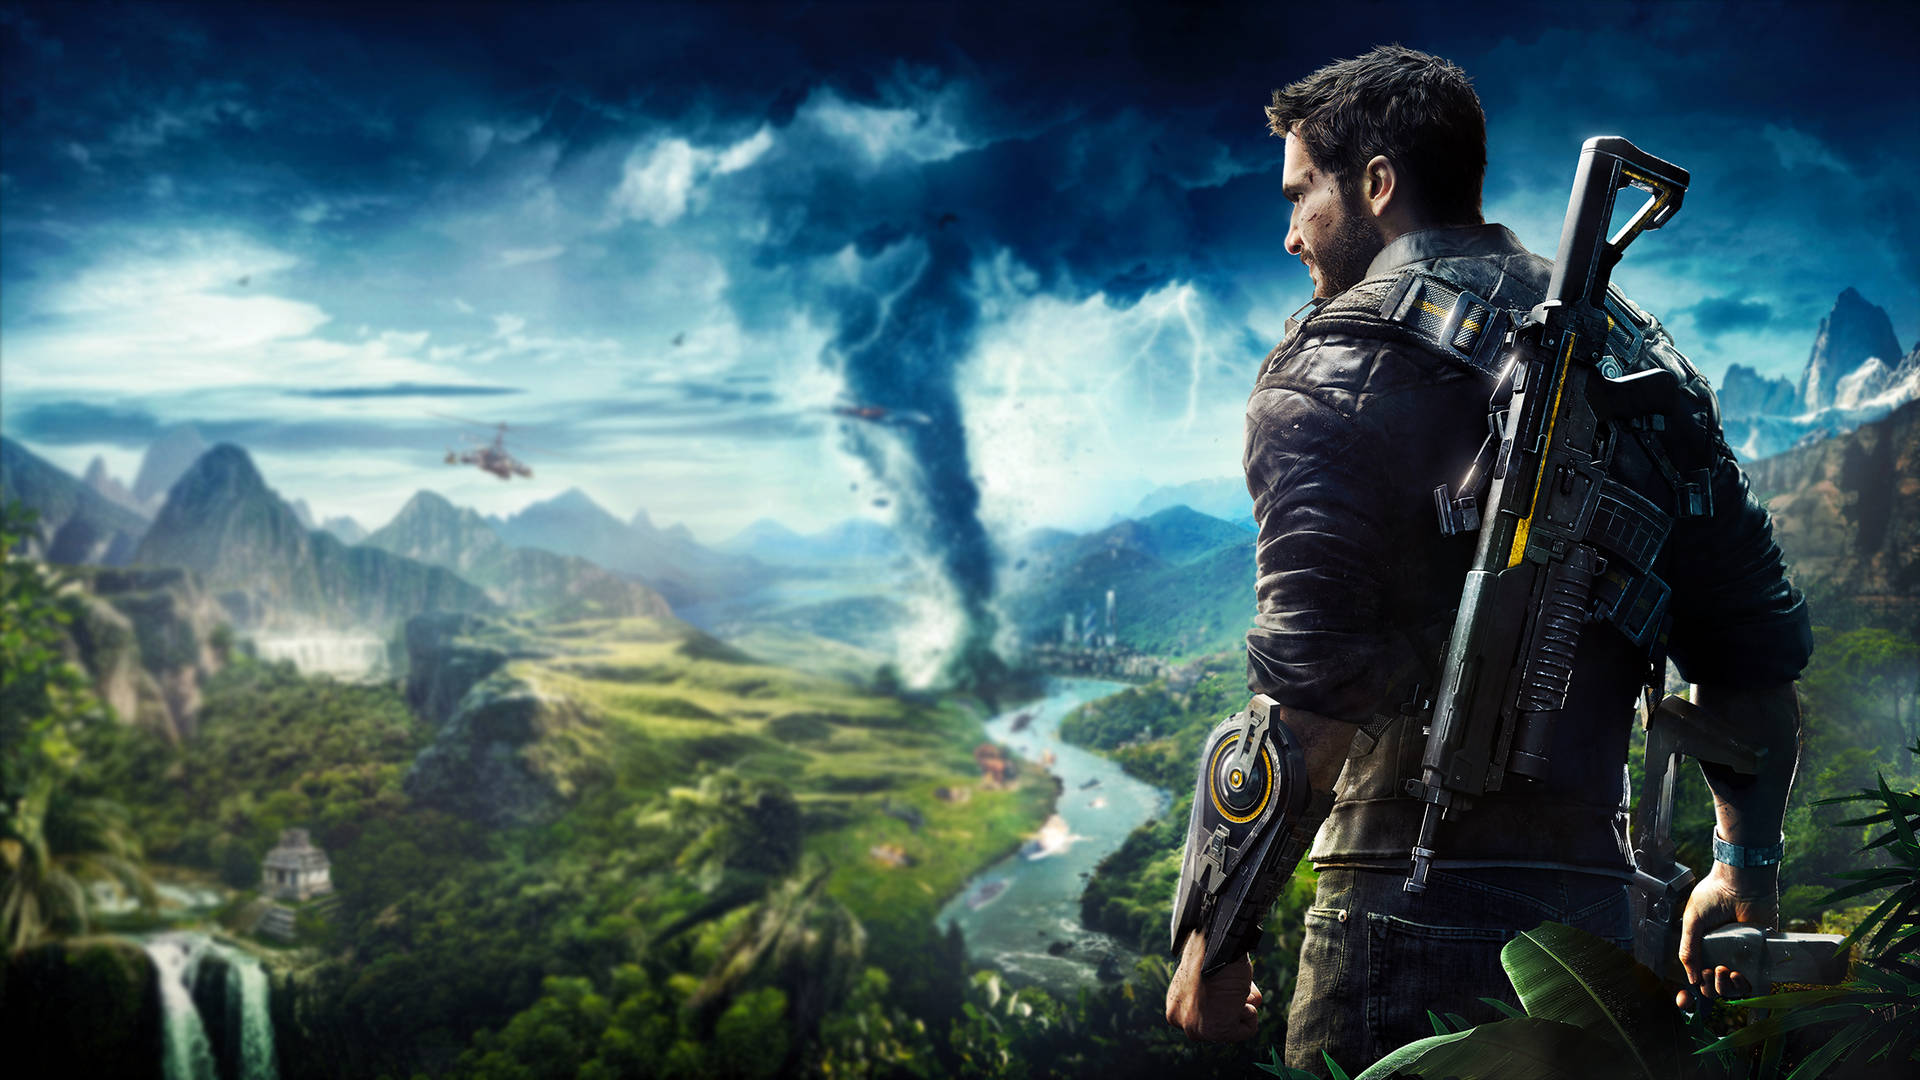 Top 999+ Just Cause 4 Wallpaper Full HD, 4K✅Free to Use